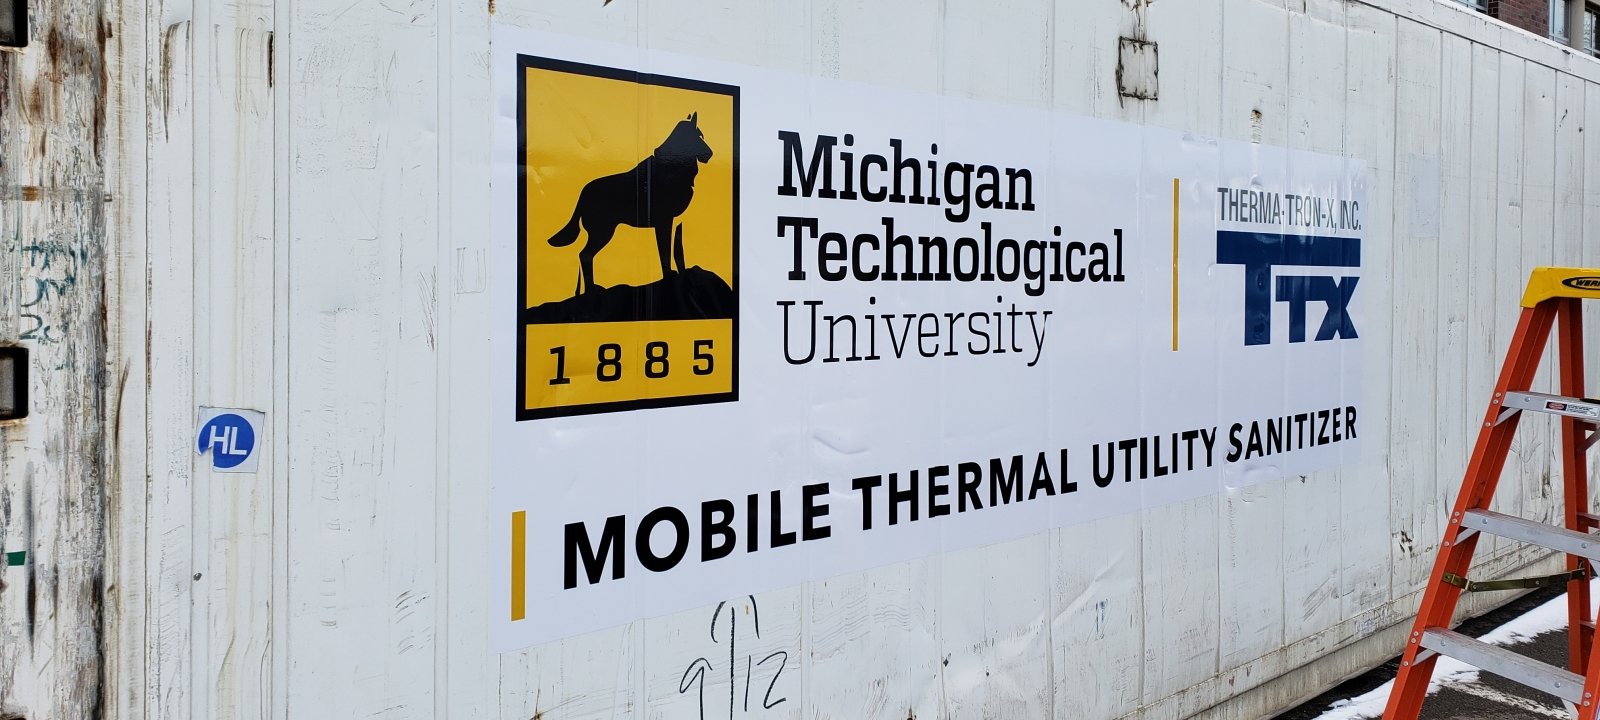 Newswise: MTU Engineers Build Mobile Unit to Clean COVID-19 PPE